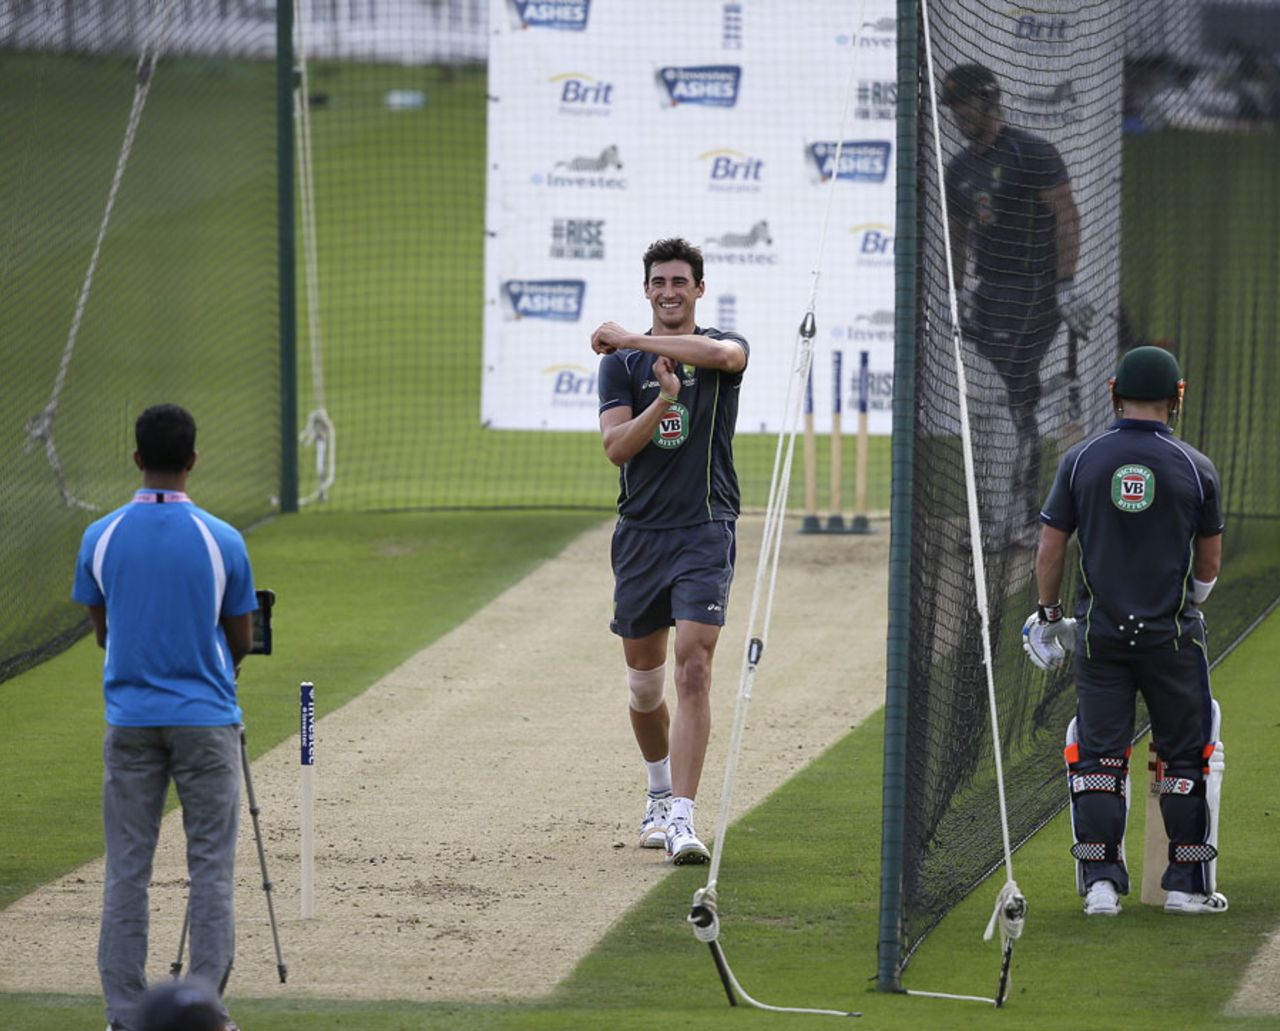 Mitchell Starc asks for a review during training, London, August 19, 2013